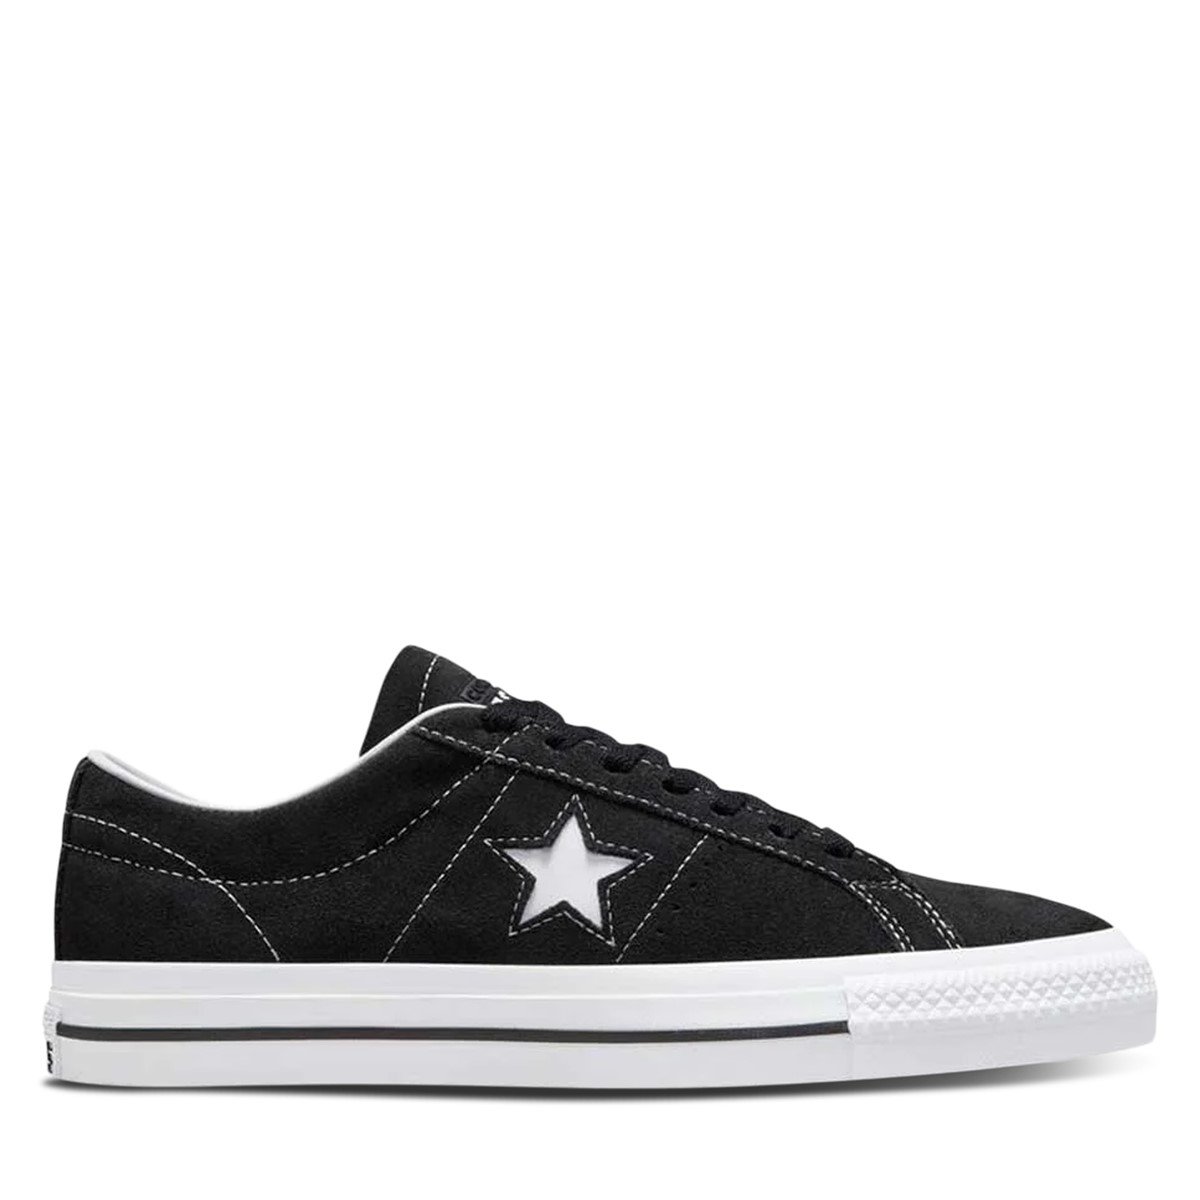 One Star Pro Sneakers in Black/White